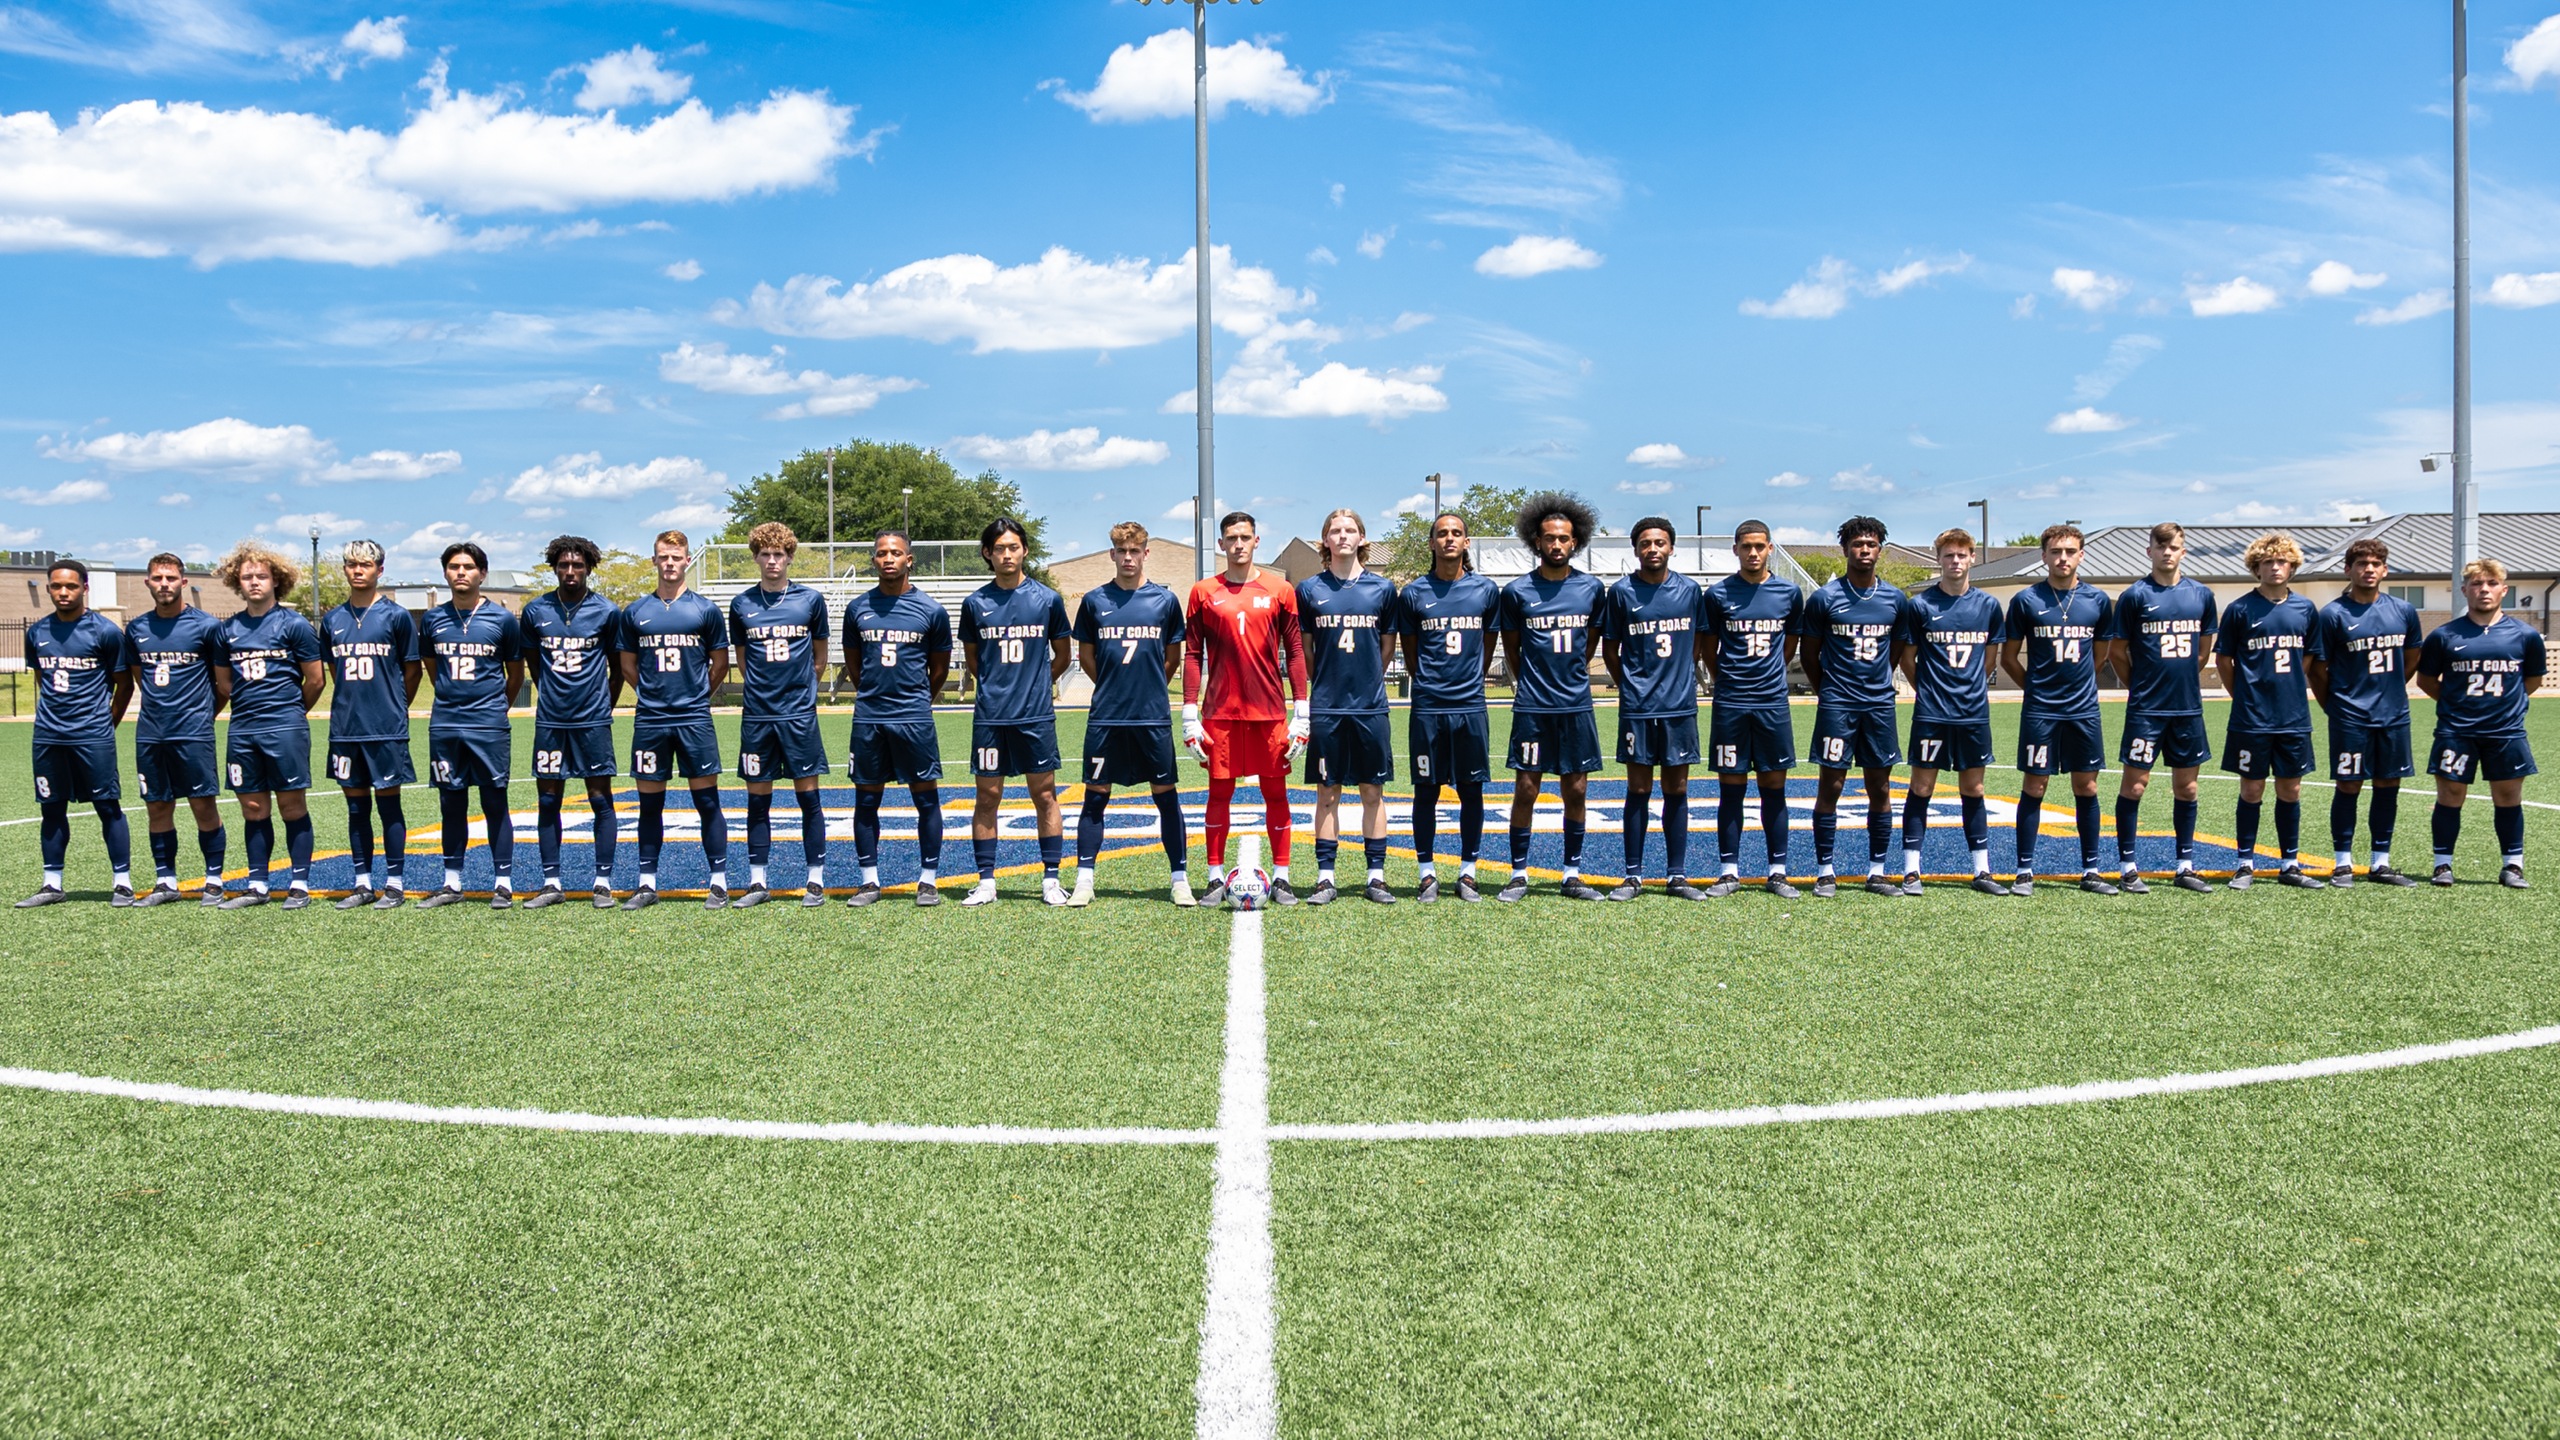 No. 17 Men’s Soccer looks to move to 3-0